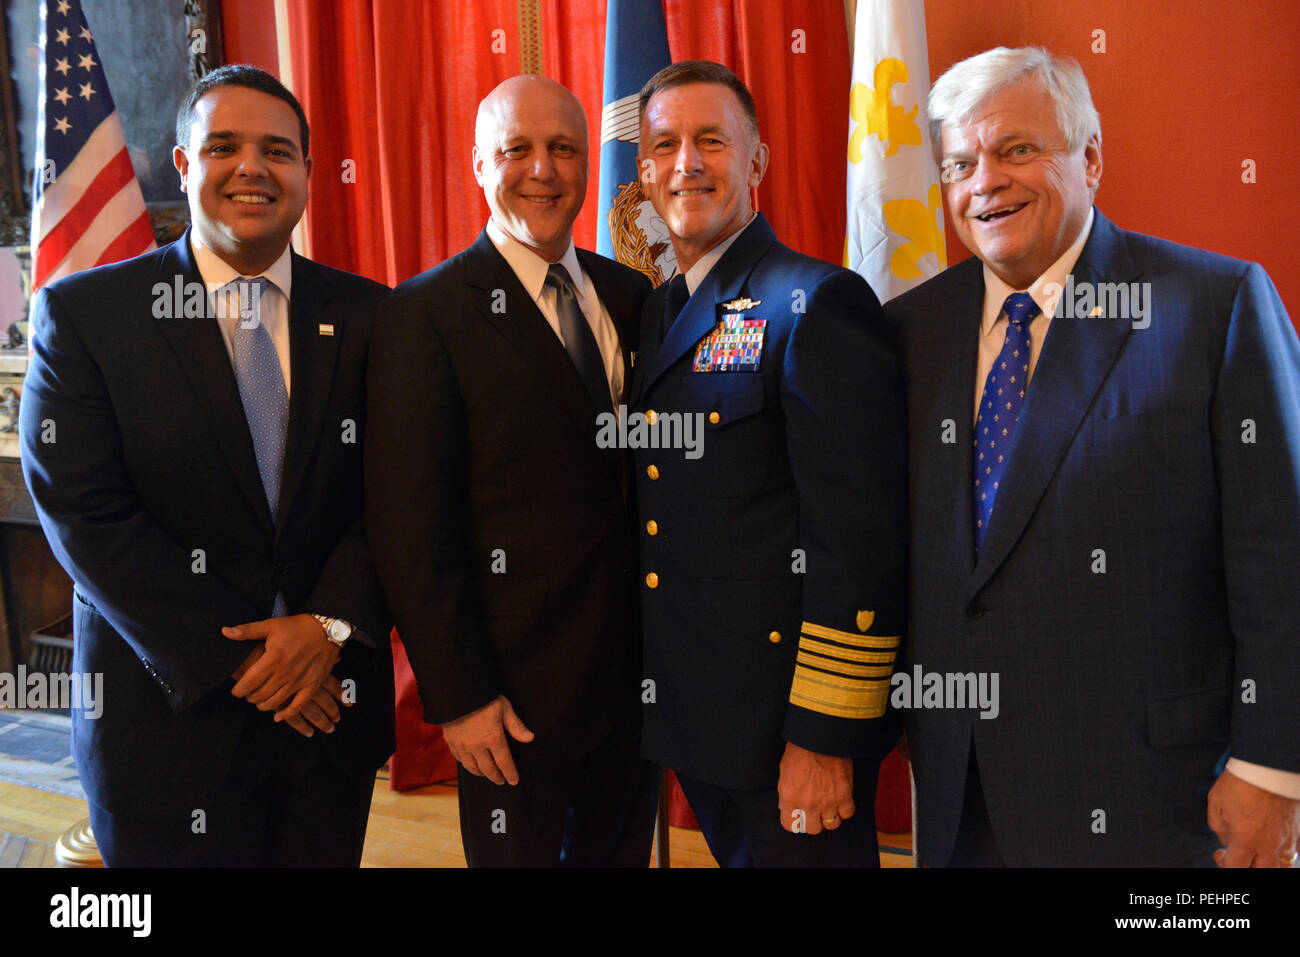 (From left to right) Jared Brossette, New Orleans City Councilman, New Orleans Mayor Mitch Landrieu, Adm. Paul Zukunft, commandant, U.S. Coast Guard and Richard E. Zuschlag, owner, Acadian Ambulance, pose for a picture at the Gallier Hall reception for Hurricane Katrina first responders, Friday. (U.S. Coast Guard photo by PA2 Seth Johnson) Stock Photo